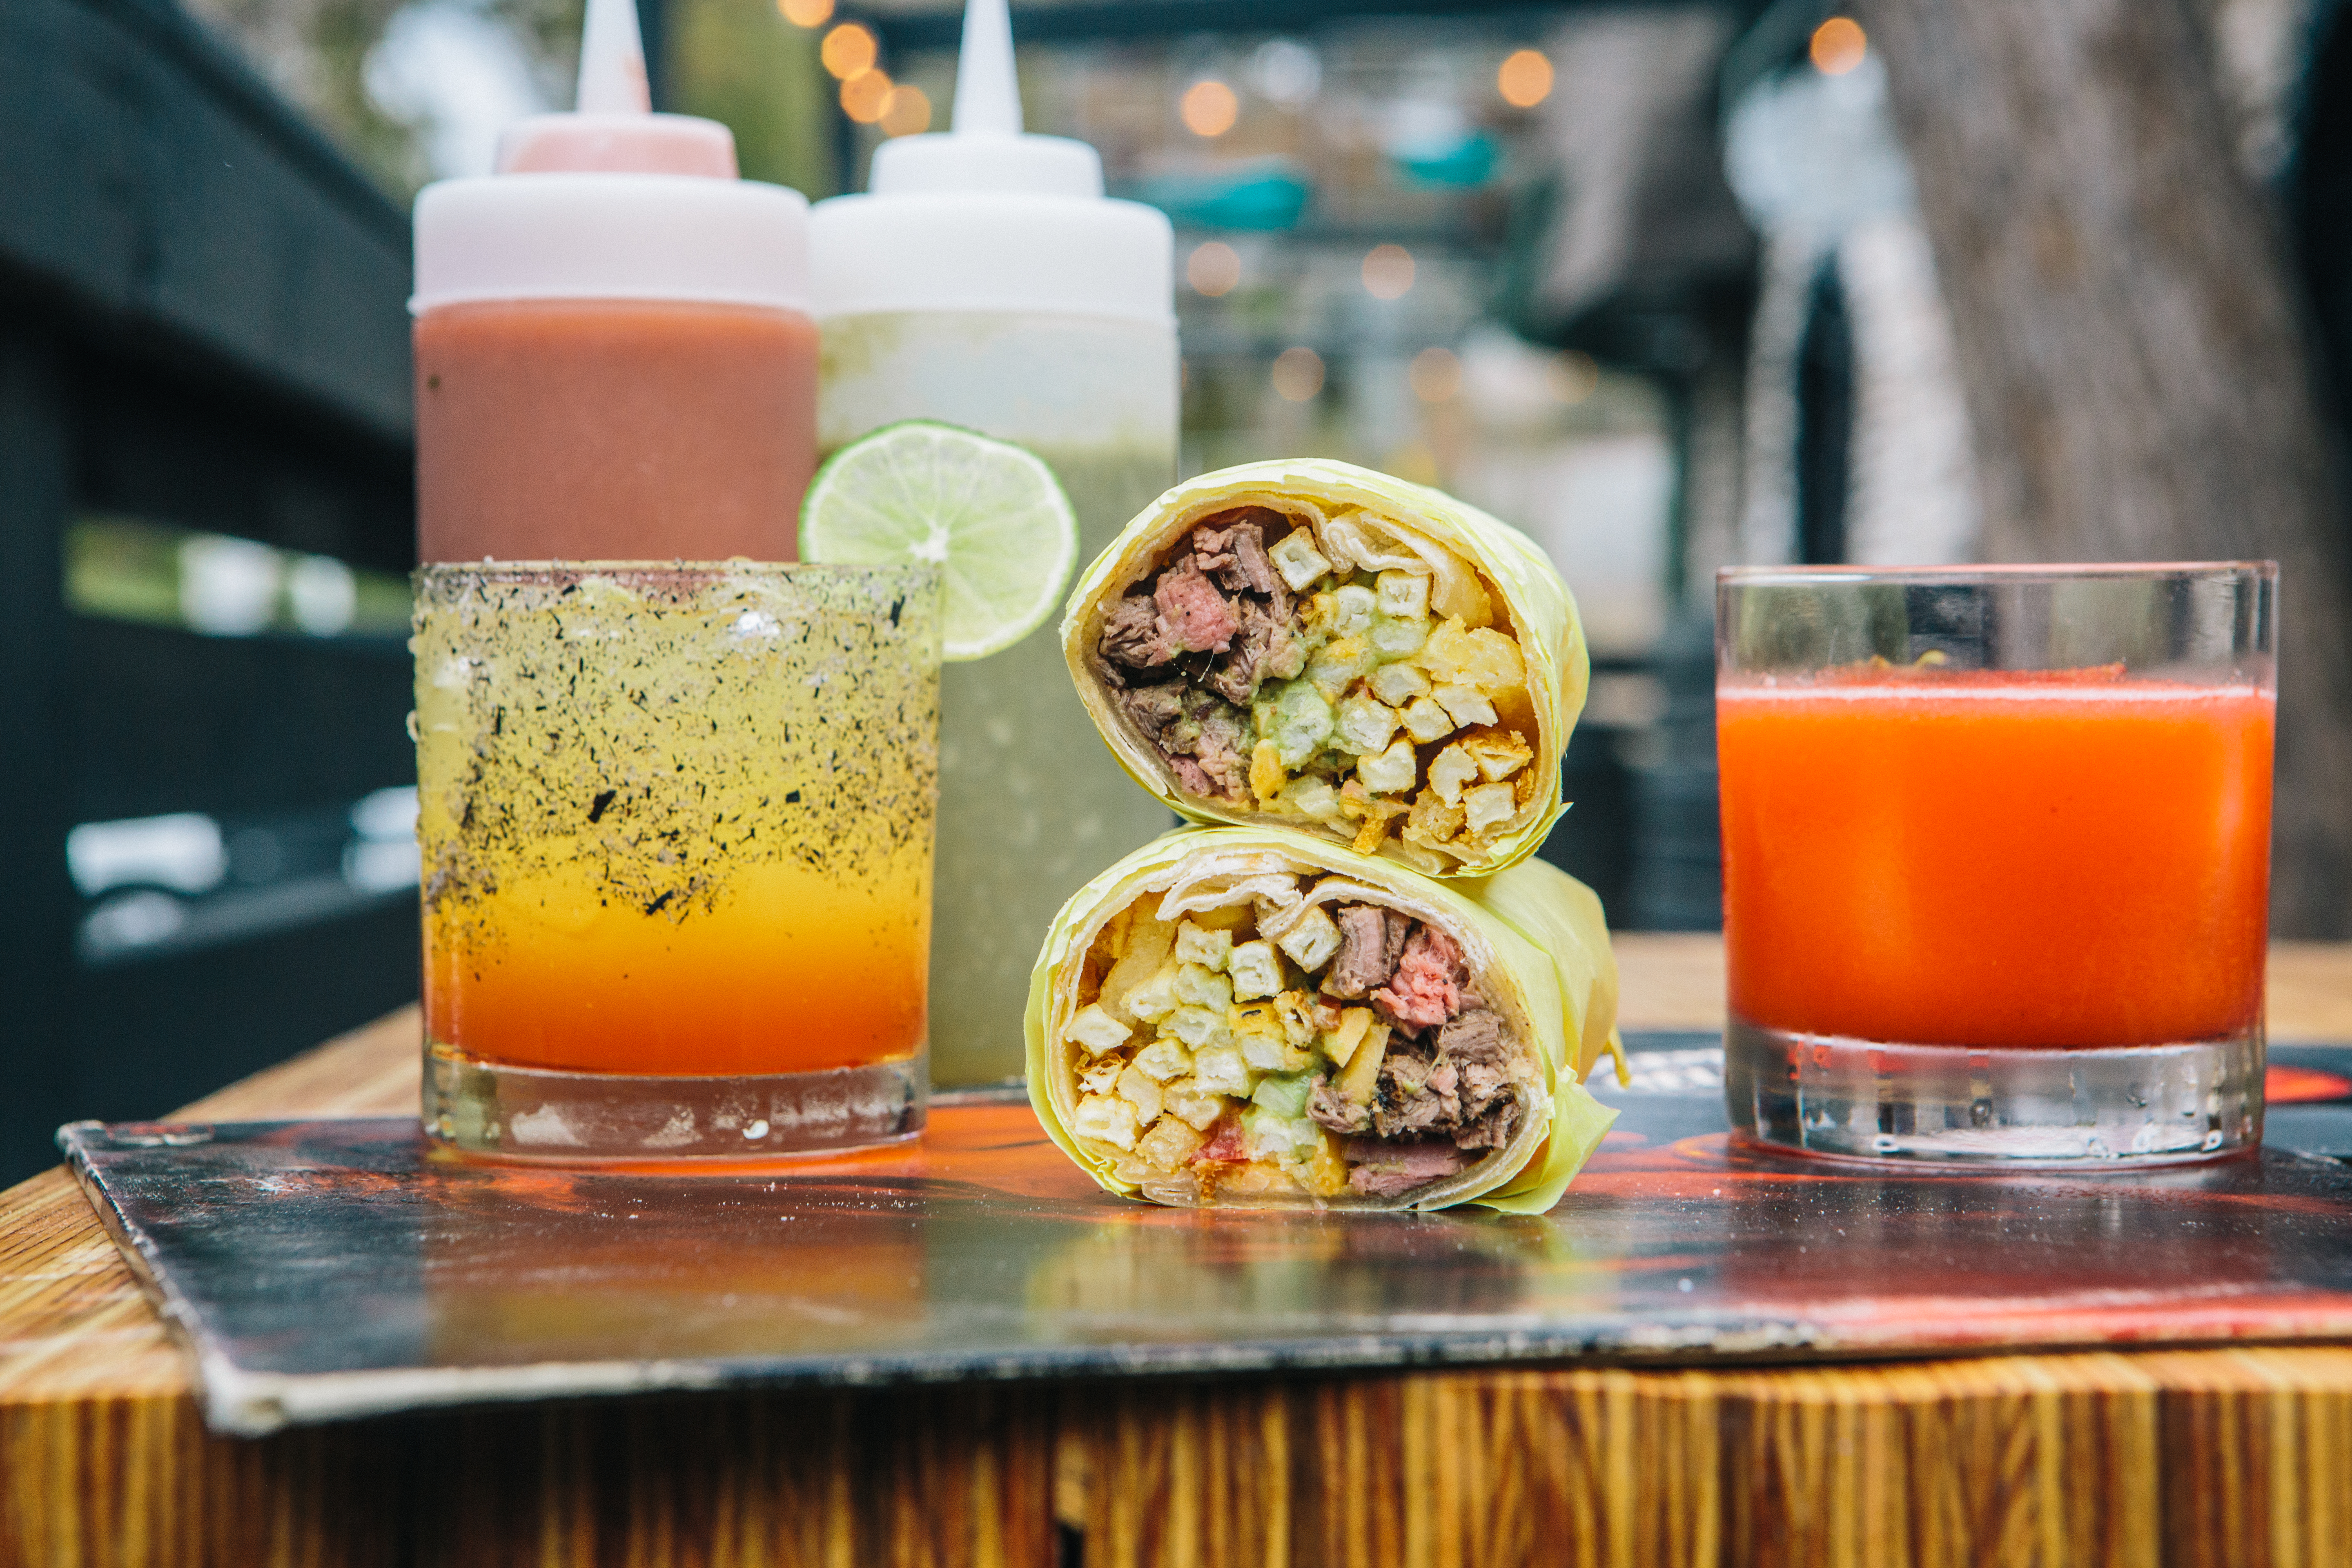 The San Diego burrito at Troublemaker, along with some cocktails